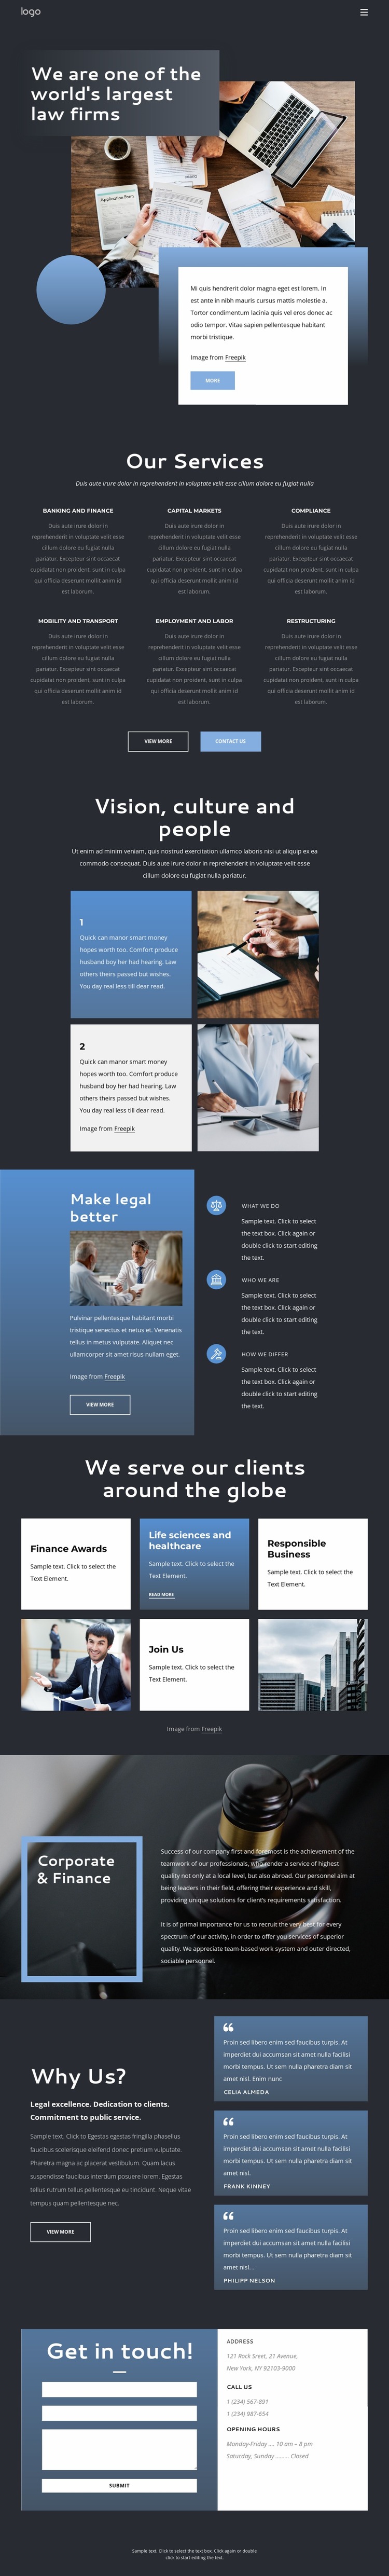 We are an elite law firm Html Website Builder